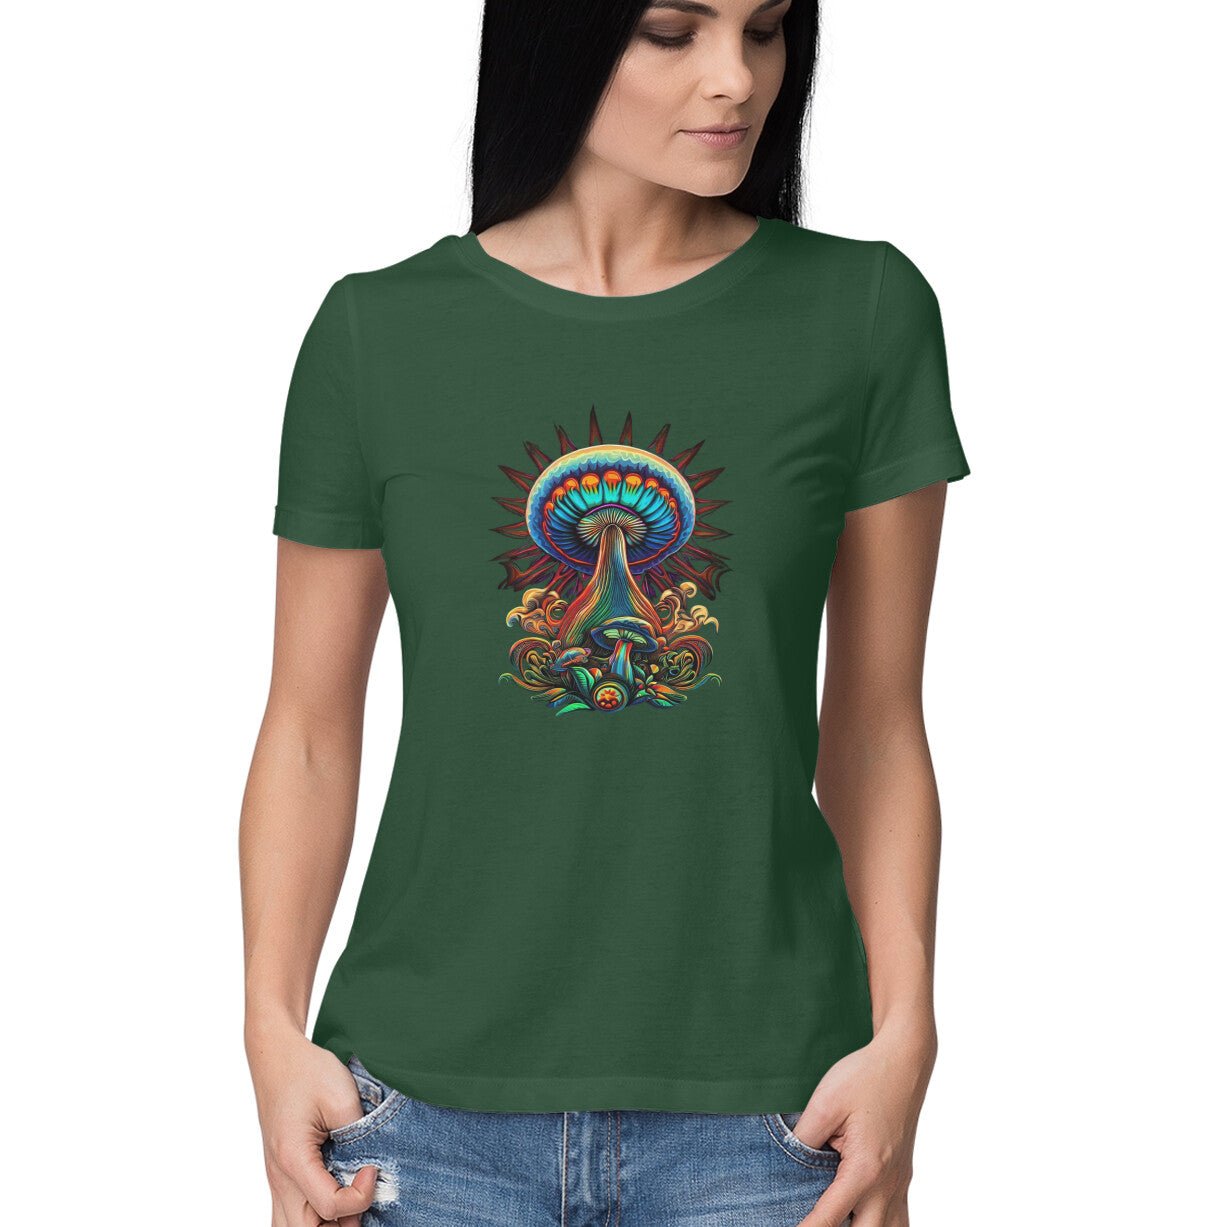 Psychedelic Mushroom: Women's Round Neck T-Shirt for Trippy Style